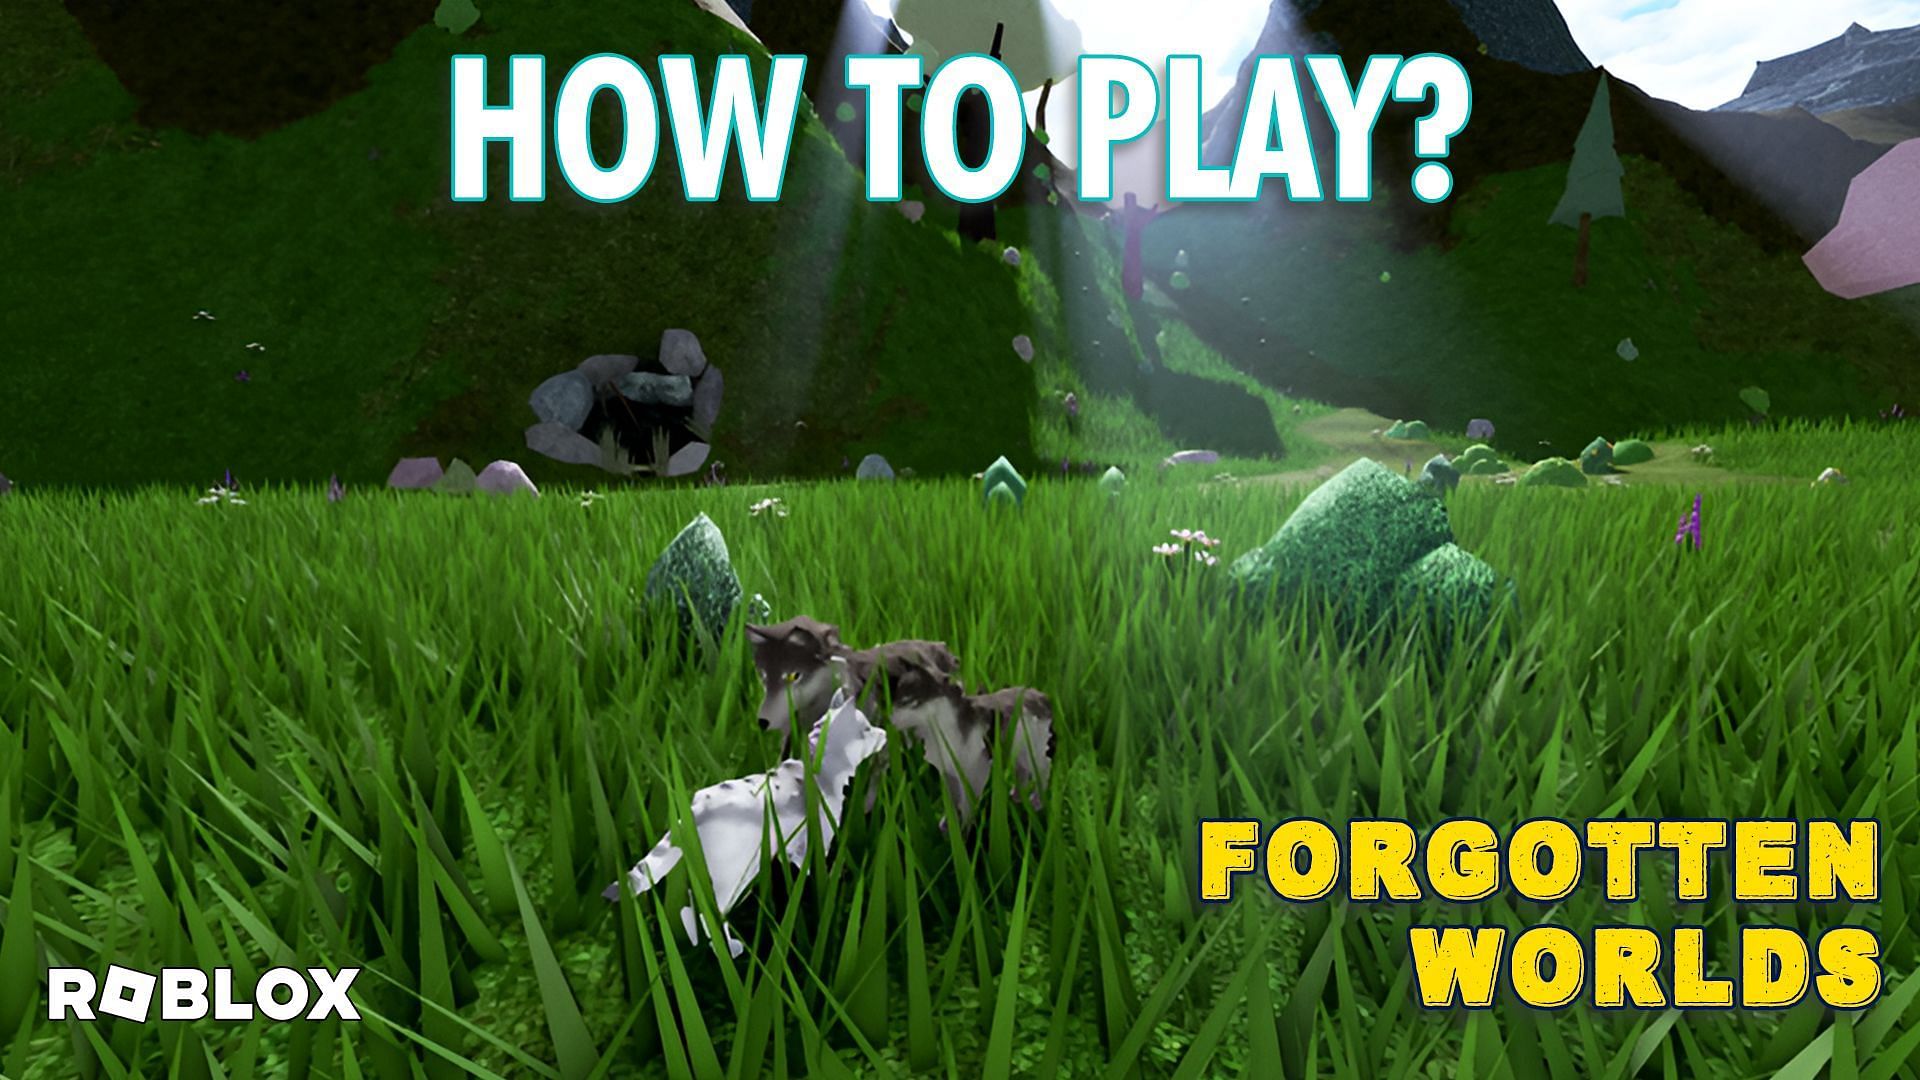 ROBLOX is a MUD: The history of MUDs, virtual worlds & MMORPGs